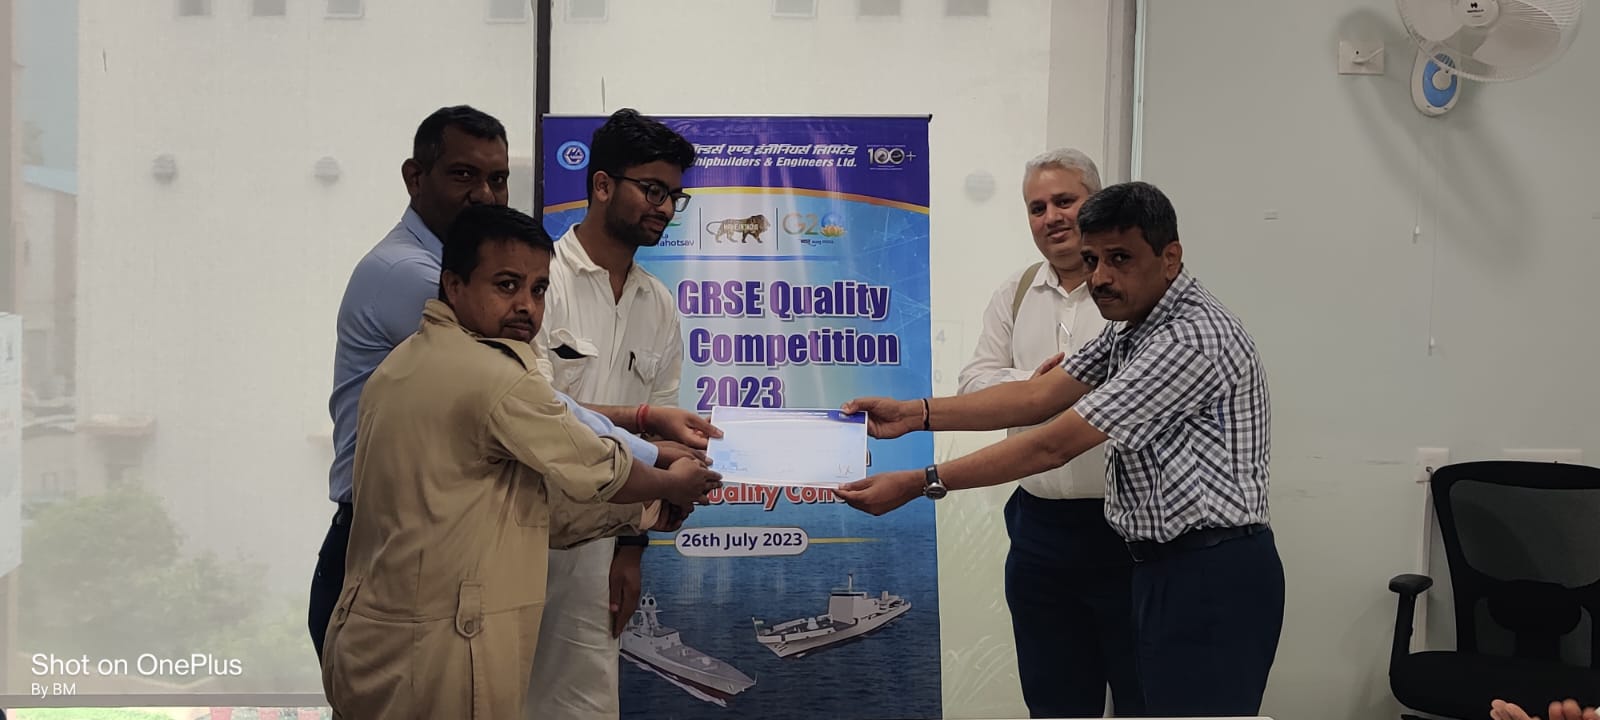 Teams for Intra GRSE Quality Circle Competition (IGQCC)-2023 on 09 Aug 23